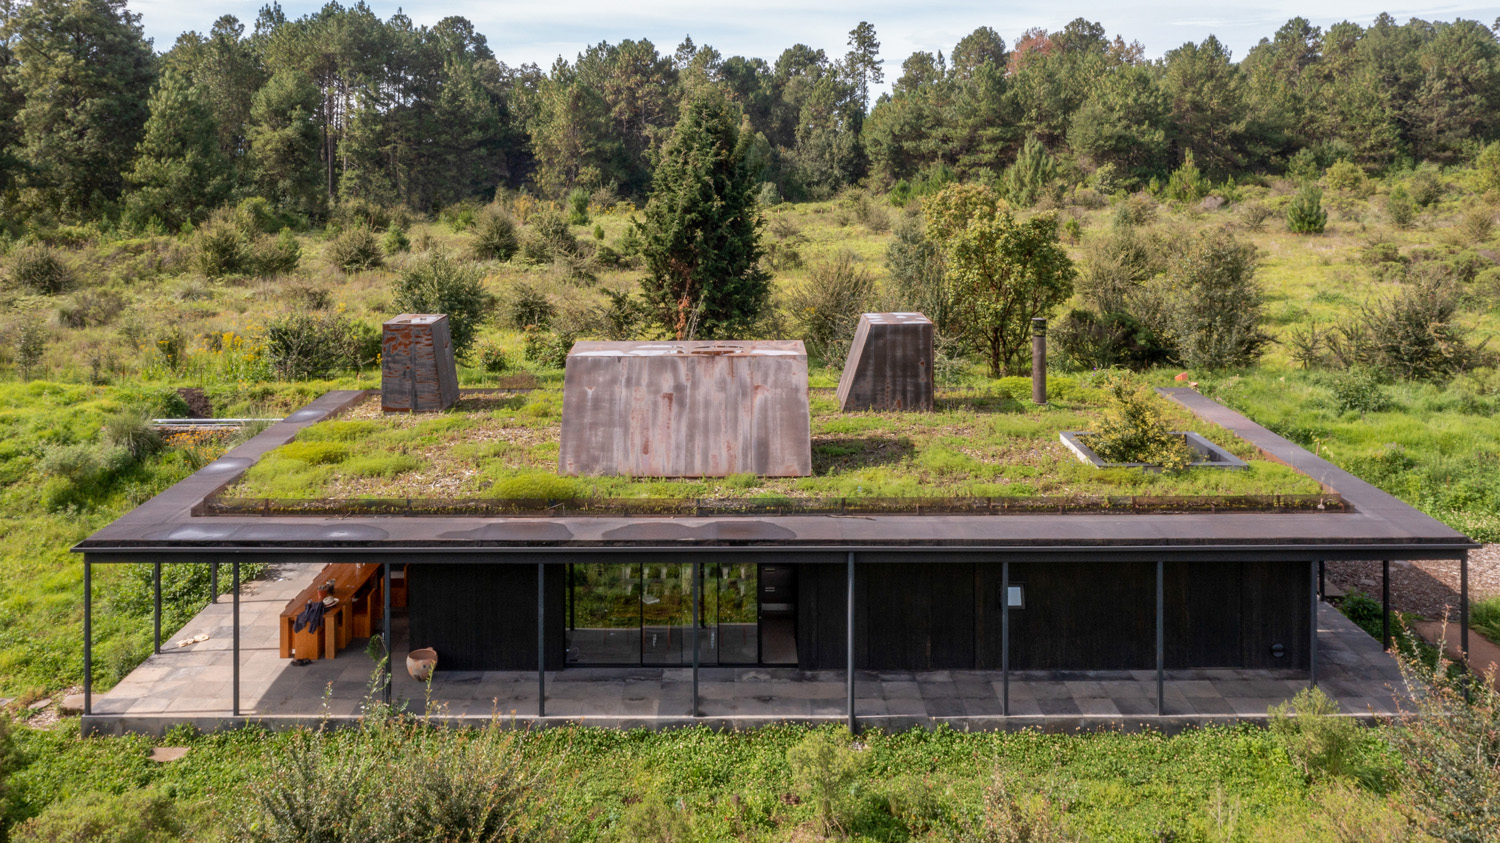 Architects’ Guide: 18 Ways To Make Your Designs More Sustainable